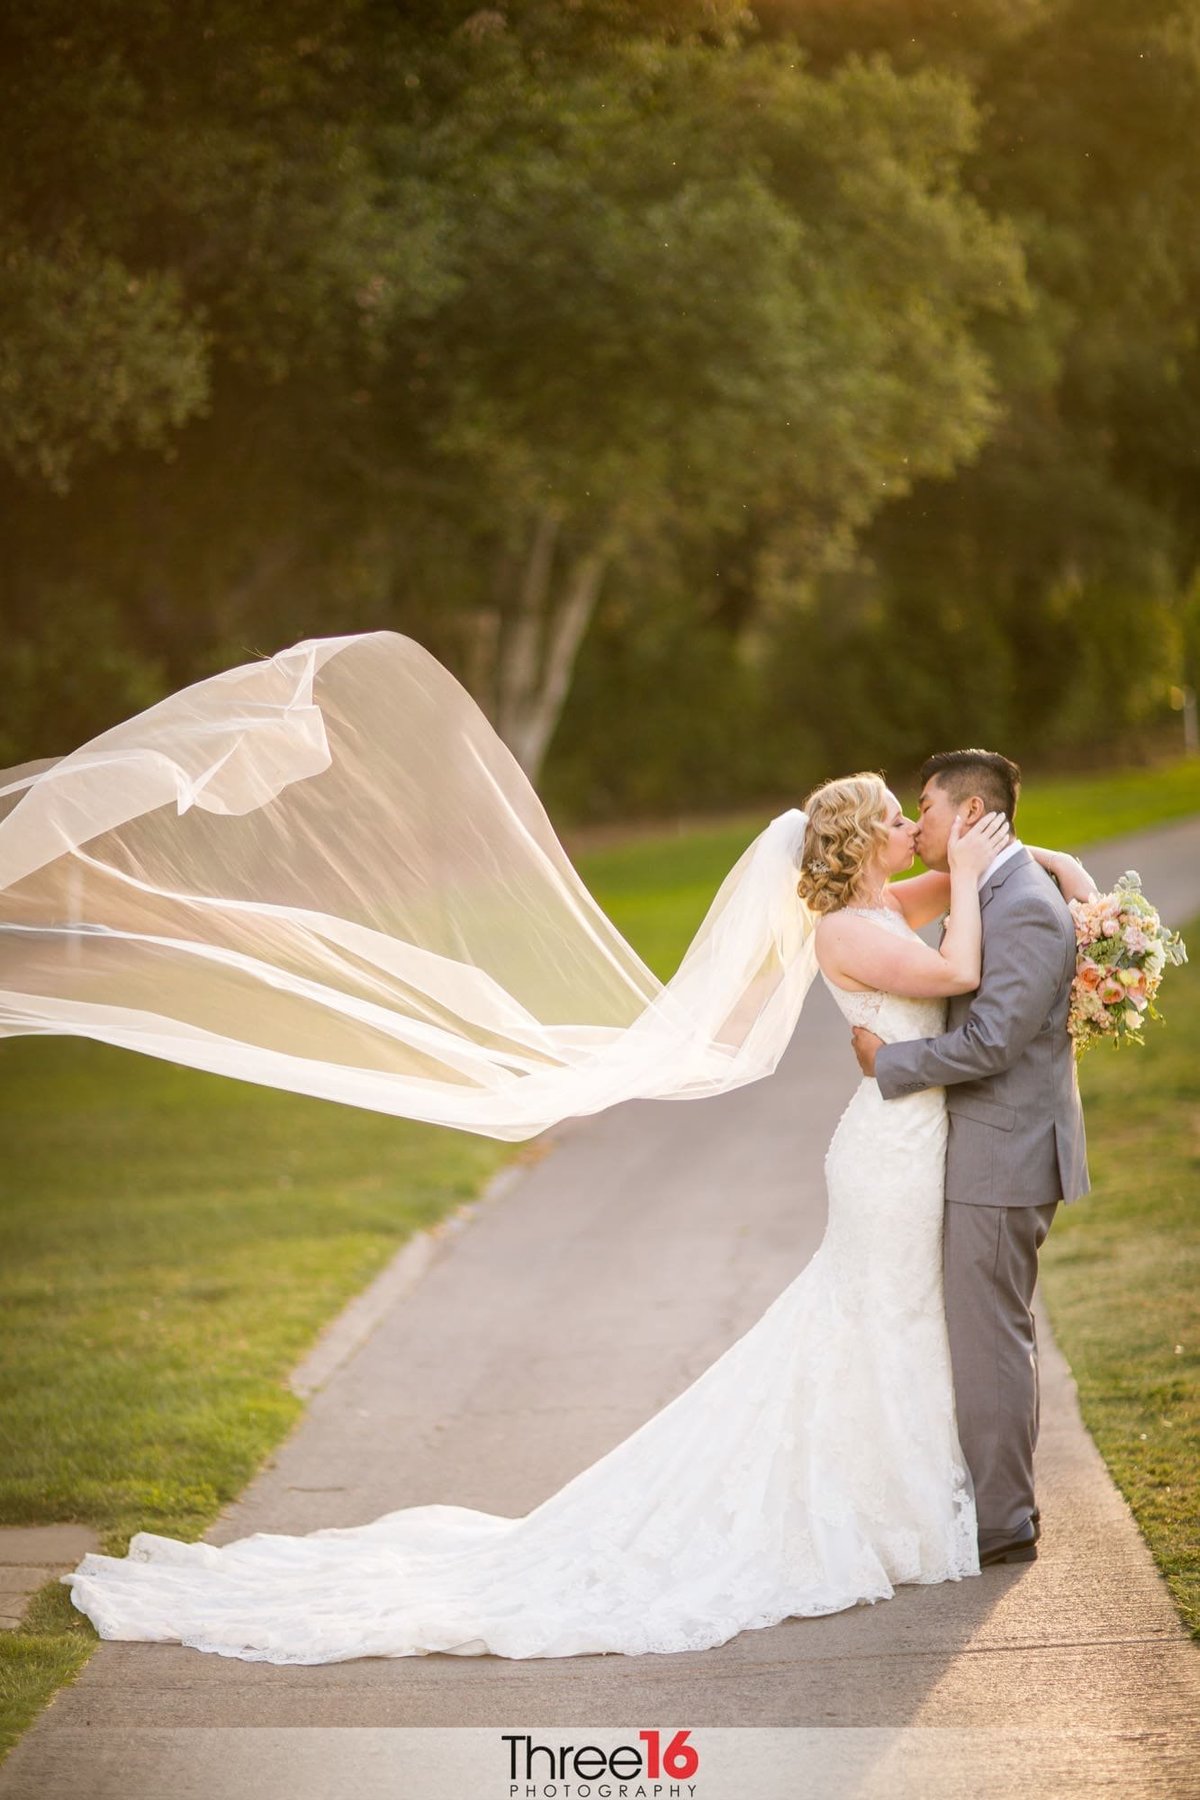 Bride and Groom share a passionate kiss on the golf course while the Bride's veil flies in the wind